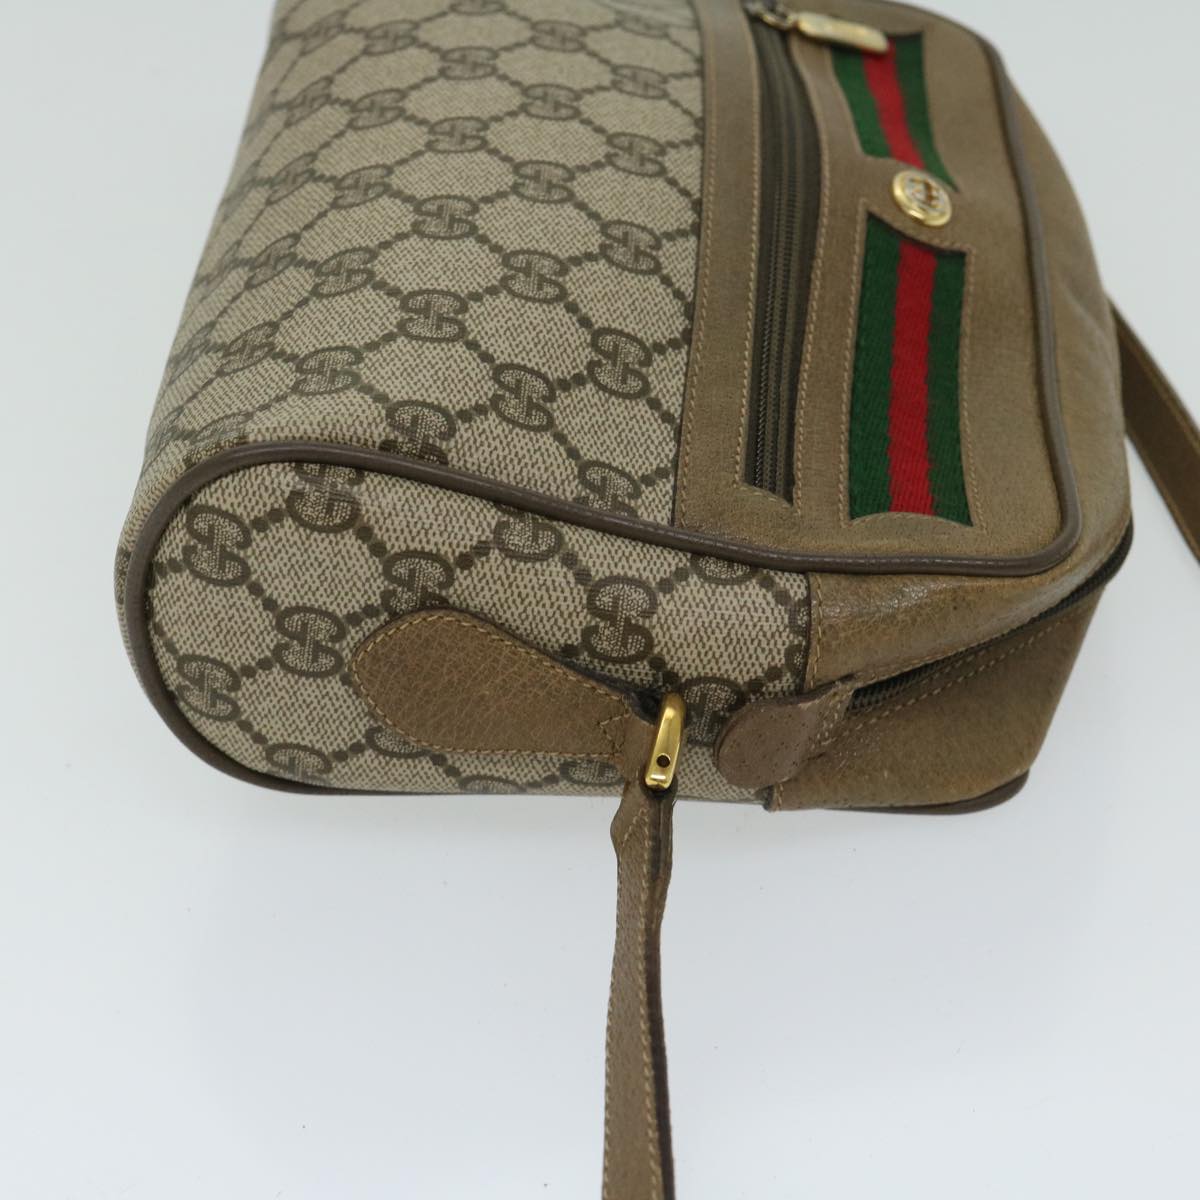 GUCCI GG Supreme Web Sherry Line Shoulder Bag Beige Red 56 02 087 Auth th4696